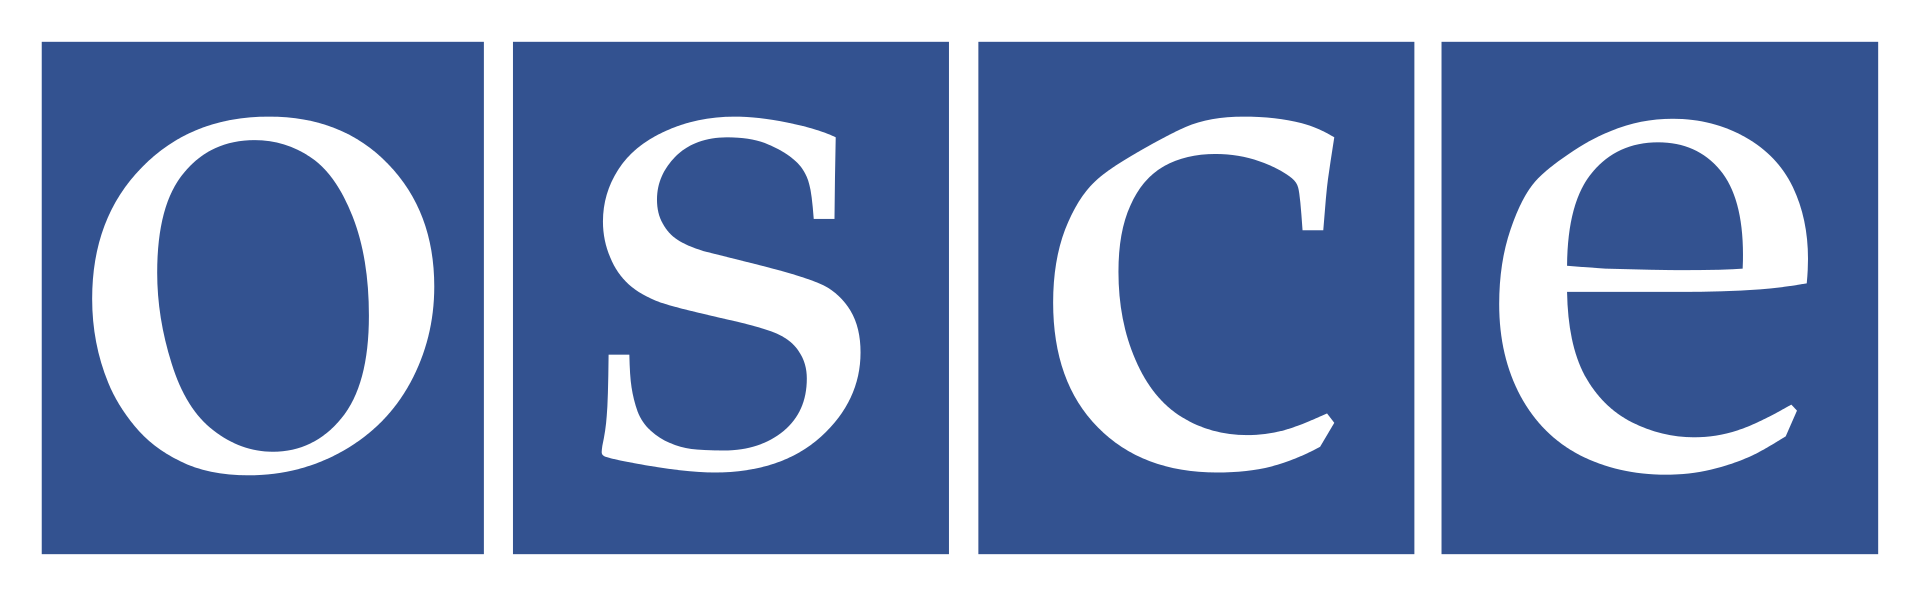 Organization for Security and Co-operation in Europe (OSCE) Logo